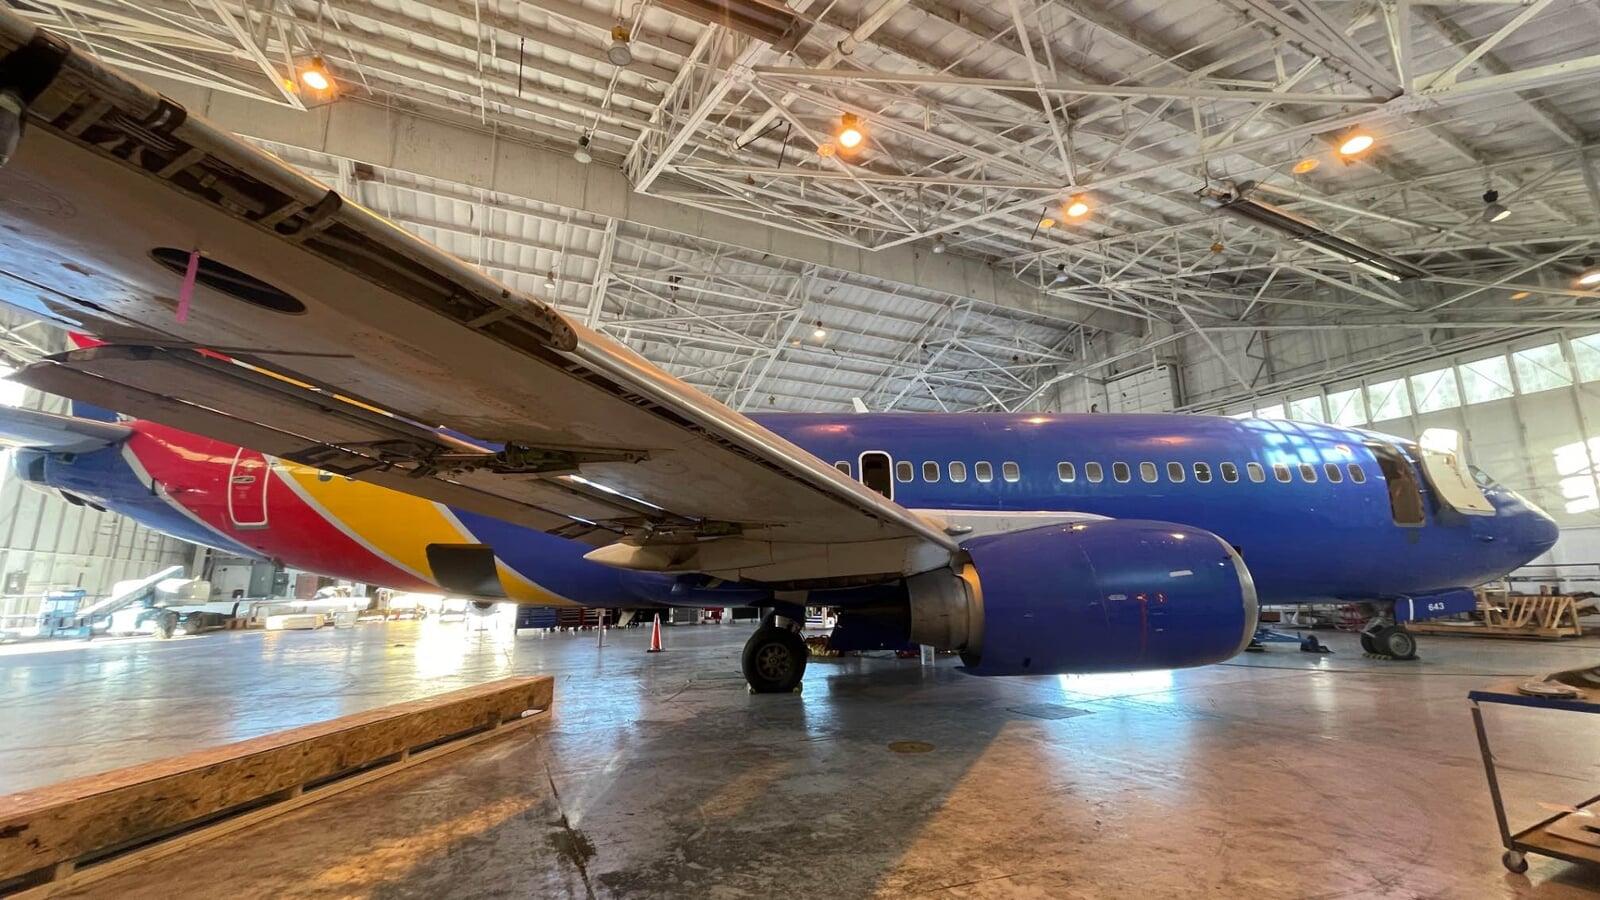 Leak check on a Boeing 737